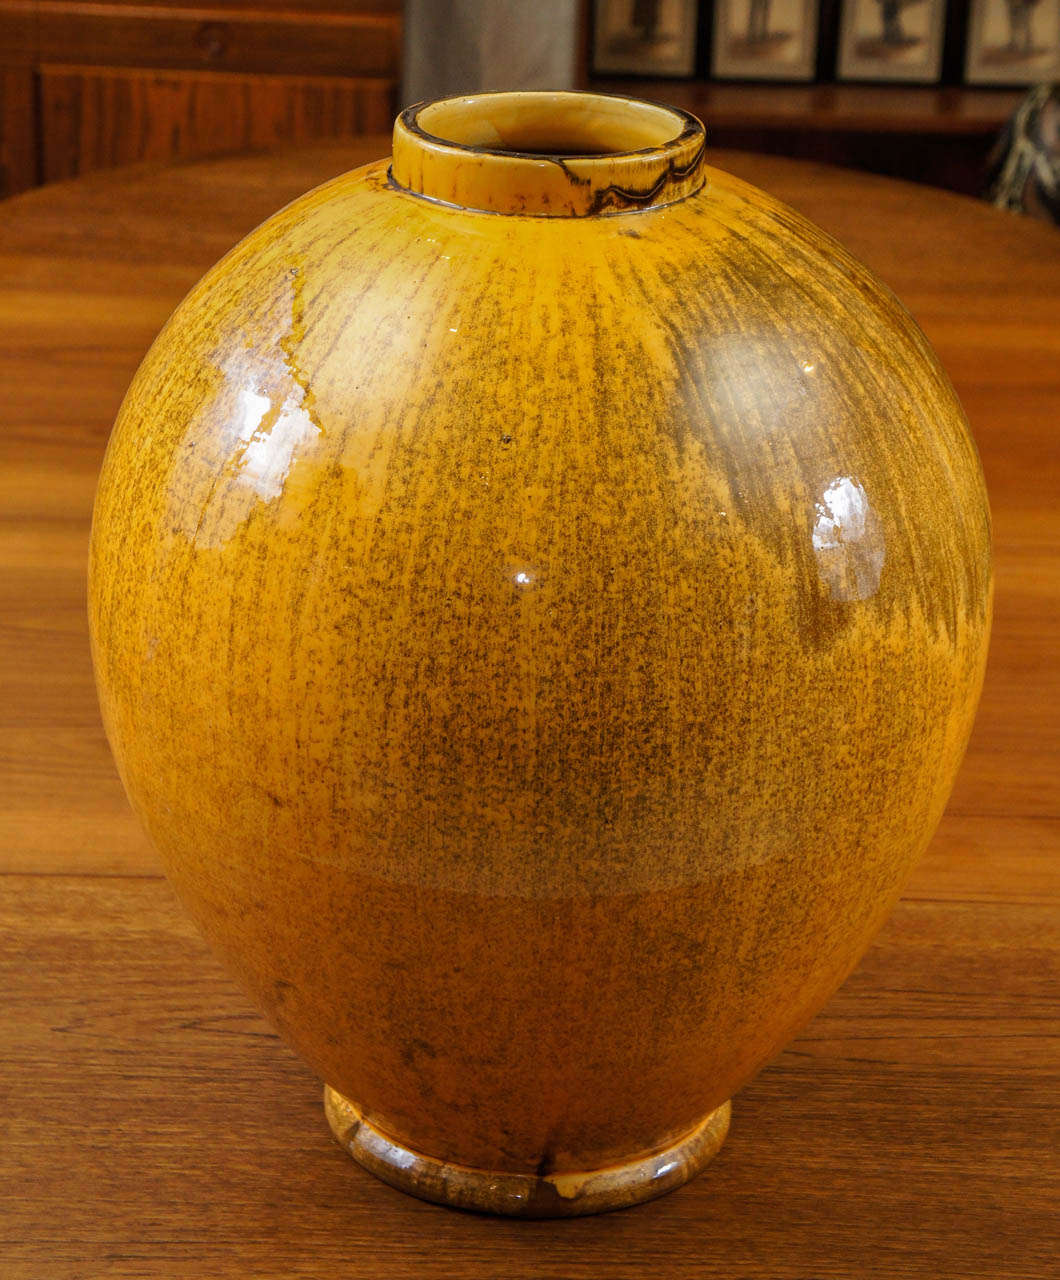 Large-scale ovoid form yellow-glazed vase by Artist Svend Hammershøi for the Herman A. Kähler pottery studio, circa 1920s.

Svend Hammershøi 1873-1948 is considered to be the most important of the artists associated with Kähler pottery in